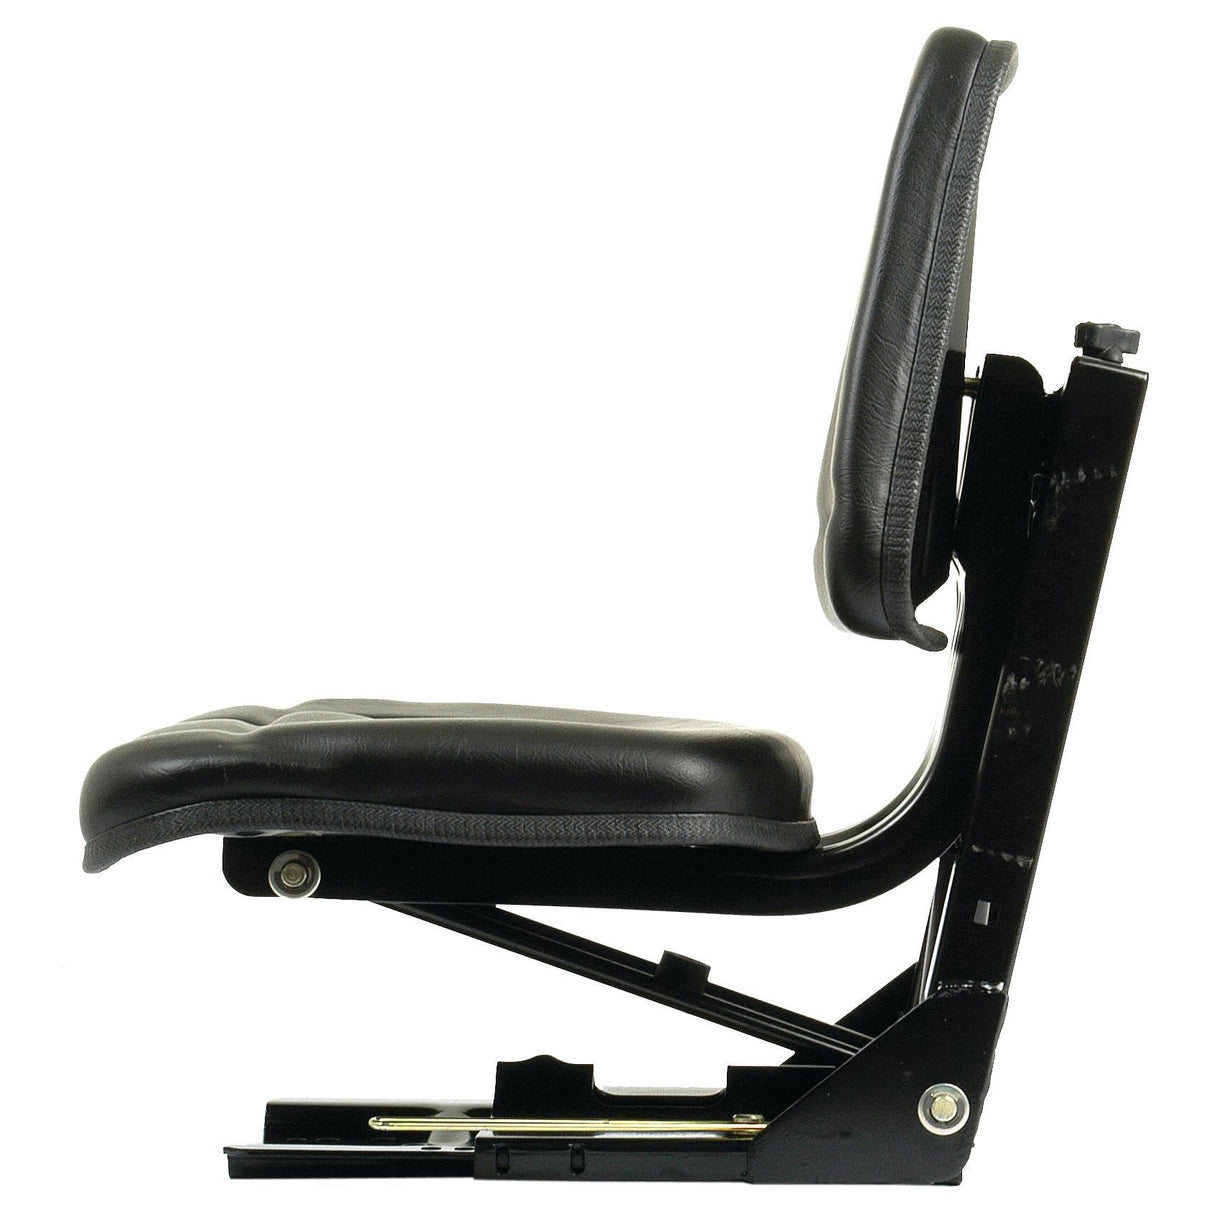 Sparex Seat Assembly
 - S.71072 - Farming Parts